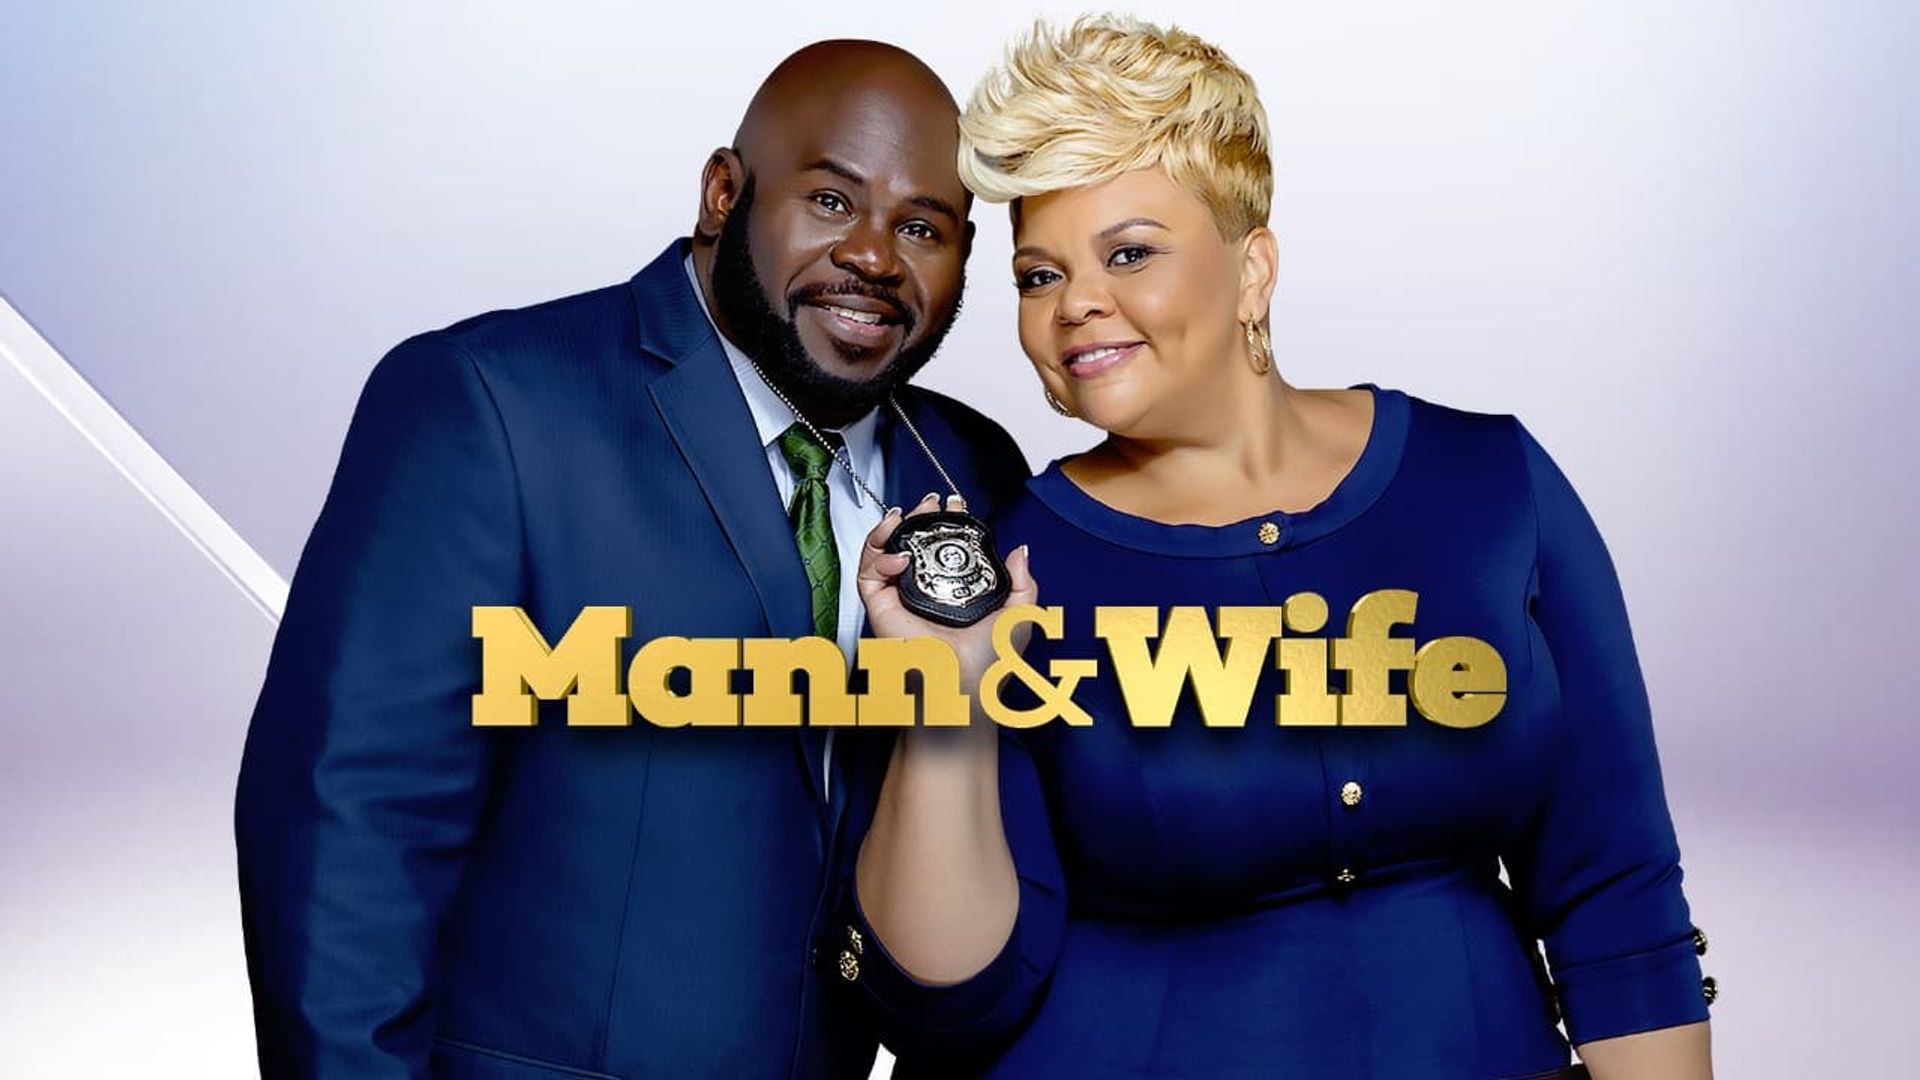 Mann and Wife background